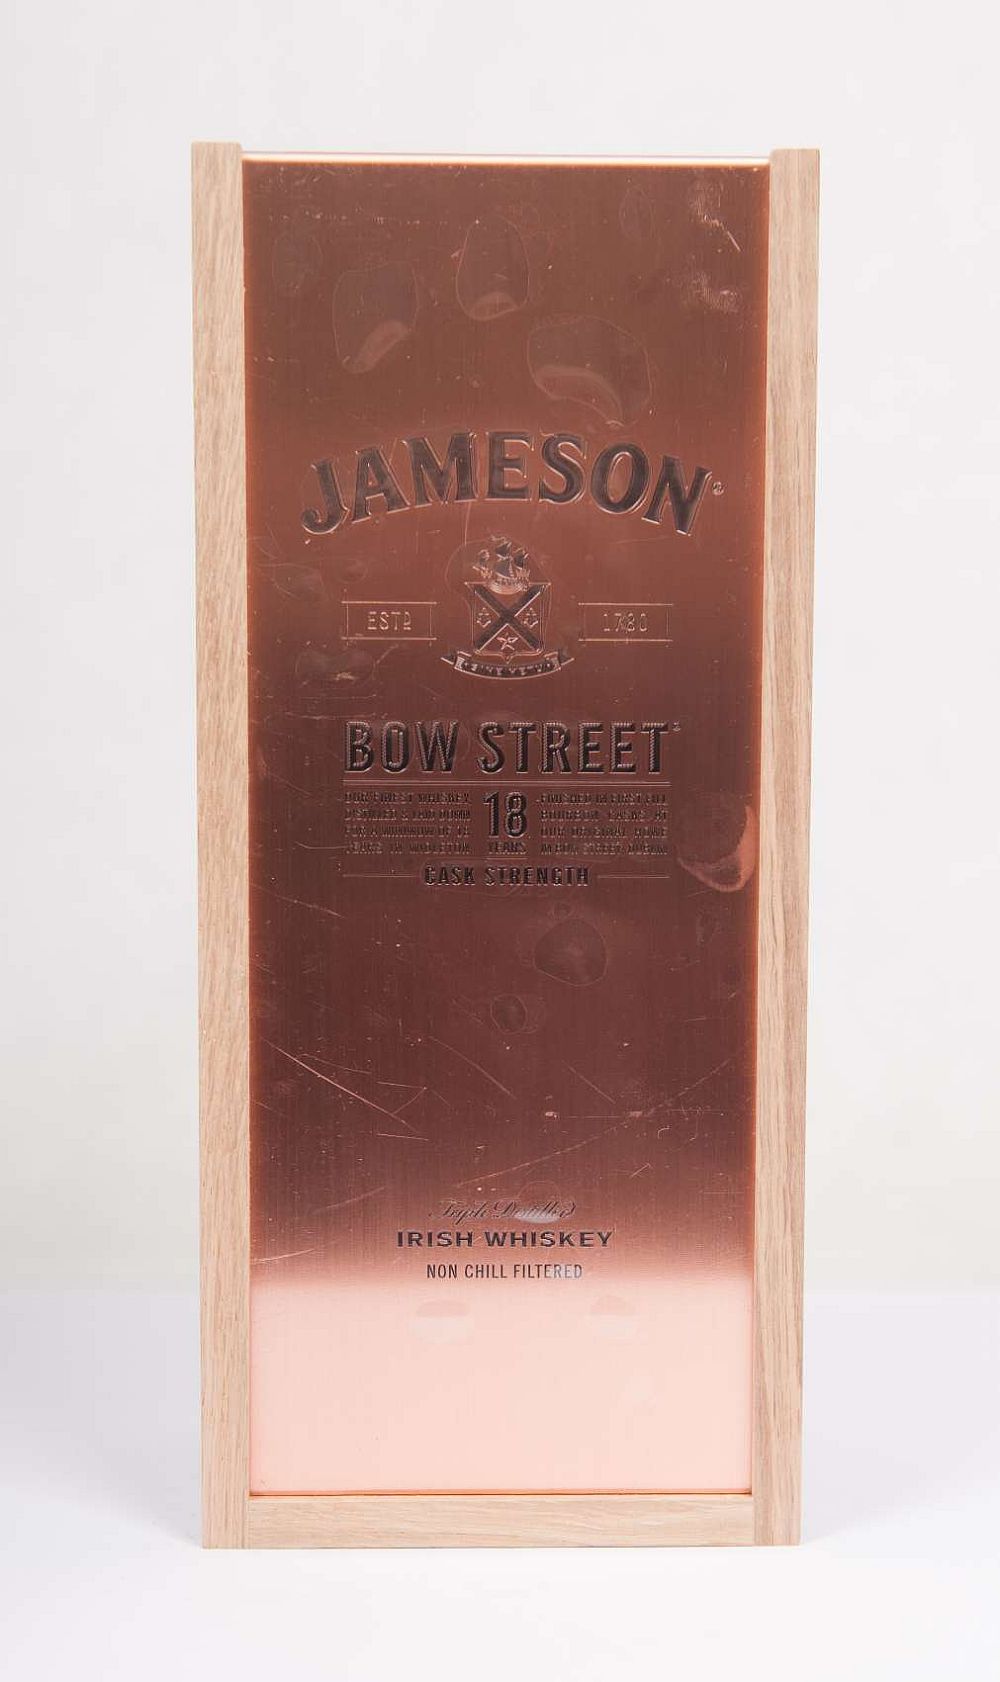 Jameson 18 year old Cask Strength, Bow Street